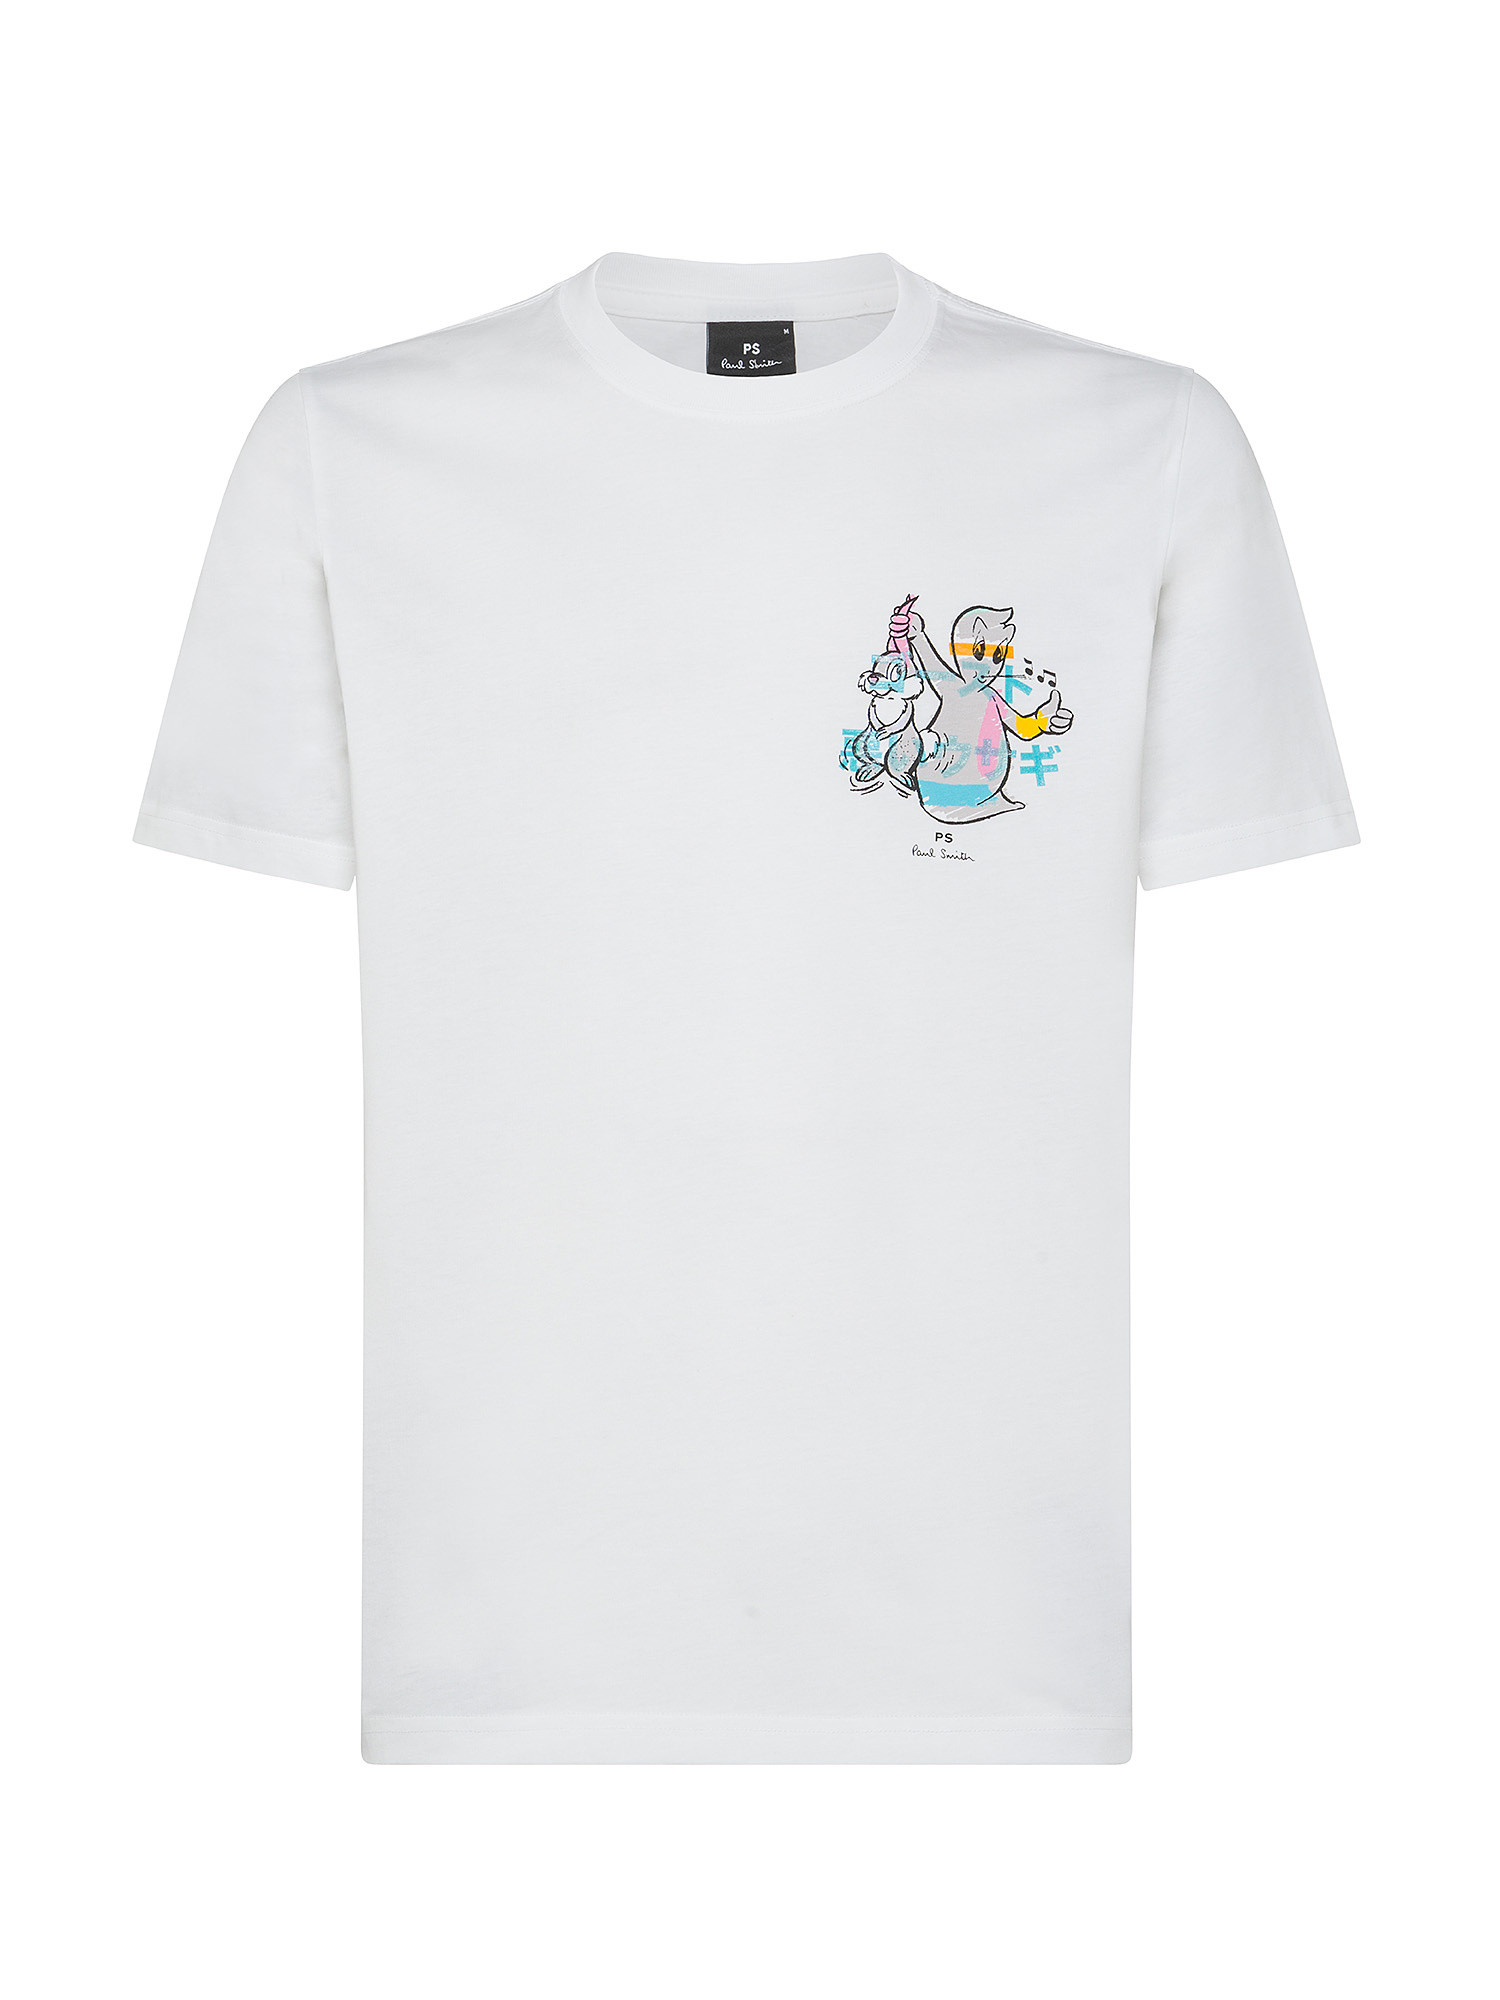 Paul Smith - T-shirt in cotone con stampa fantasma, Bianco, large image number 0